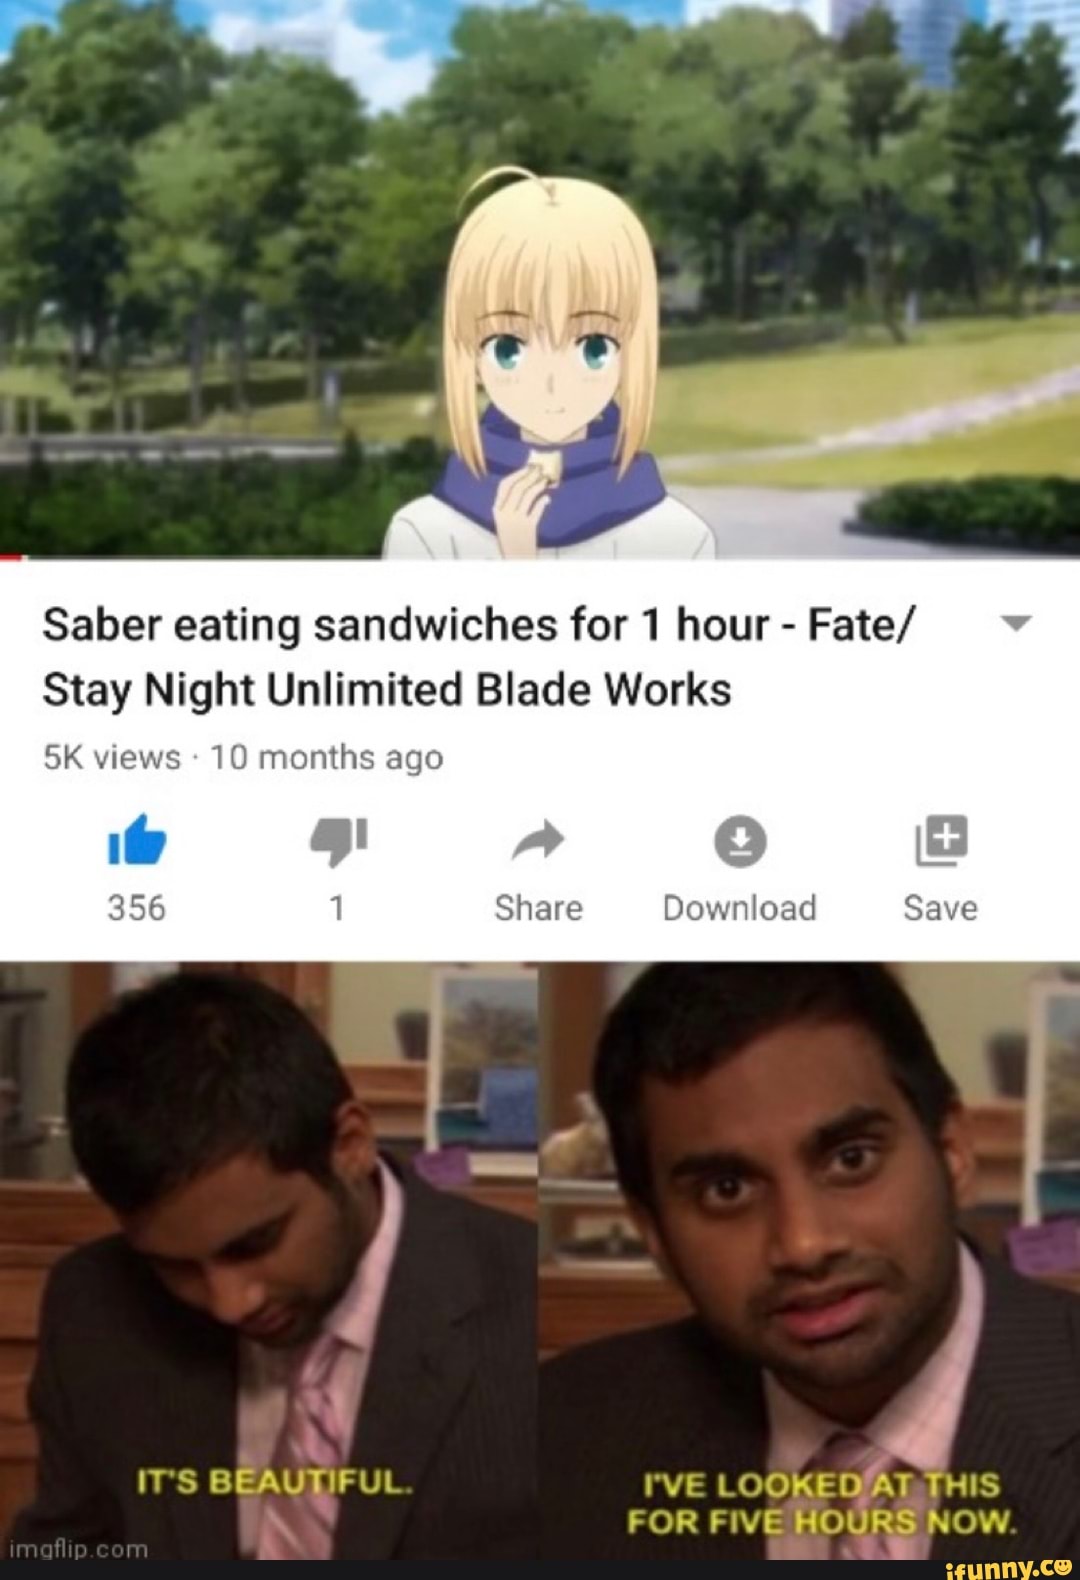 Saber Eating Sandwiches For 1 Hour Fate Stay Night Unlimited Blade Works Sk Views 10 Months Ago Ed 356 Share Download Save Its Beautiful I Ve At This For Five Hours Now